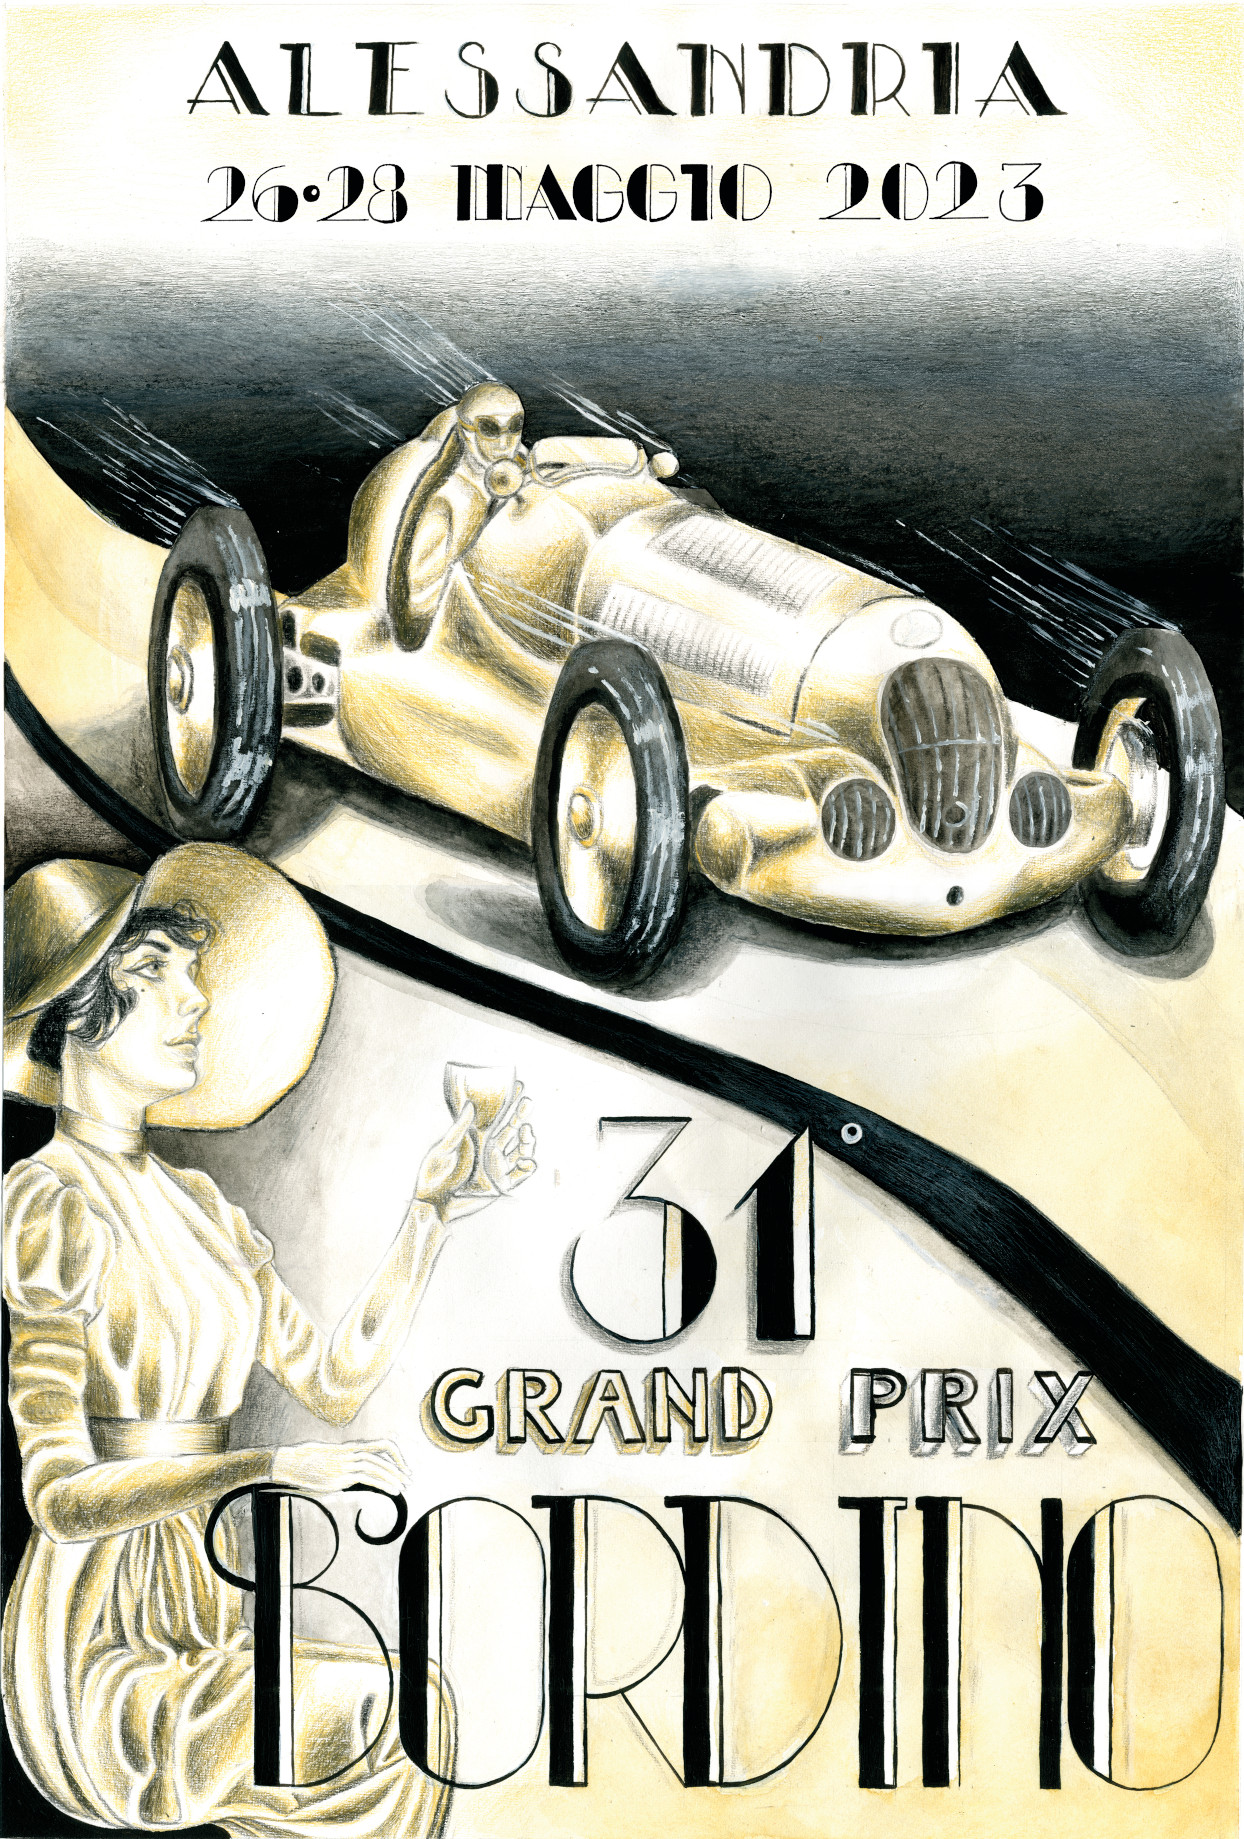 The 31st Bordino Grand Prix sees vintage and sportscars touring Piedmont.